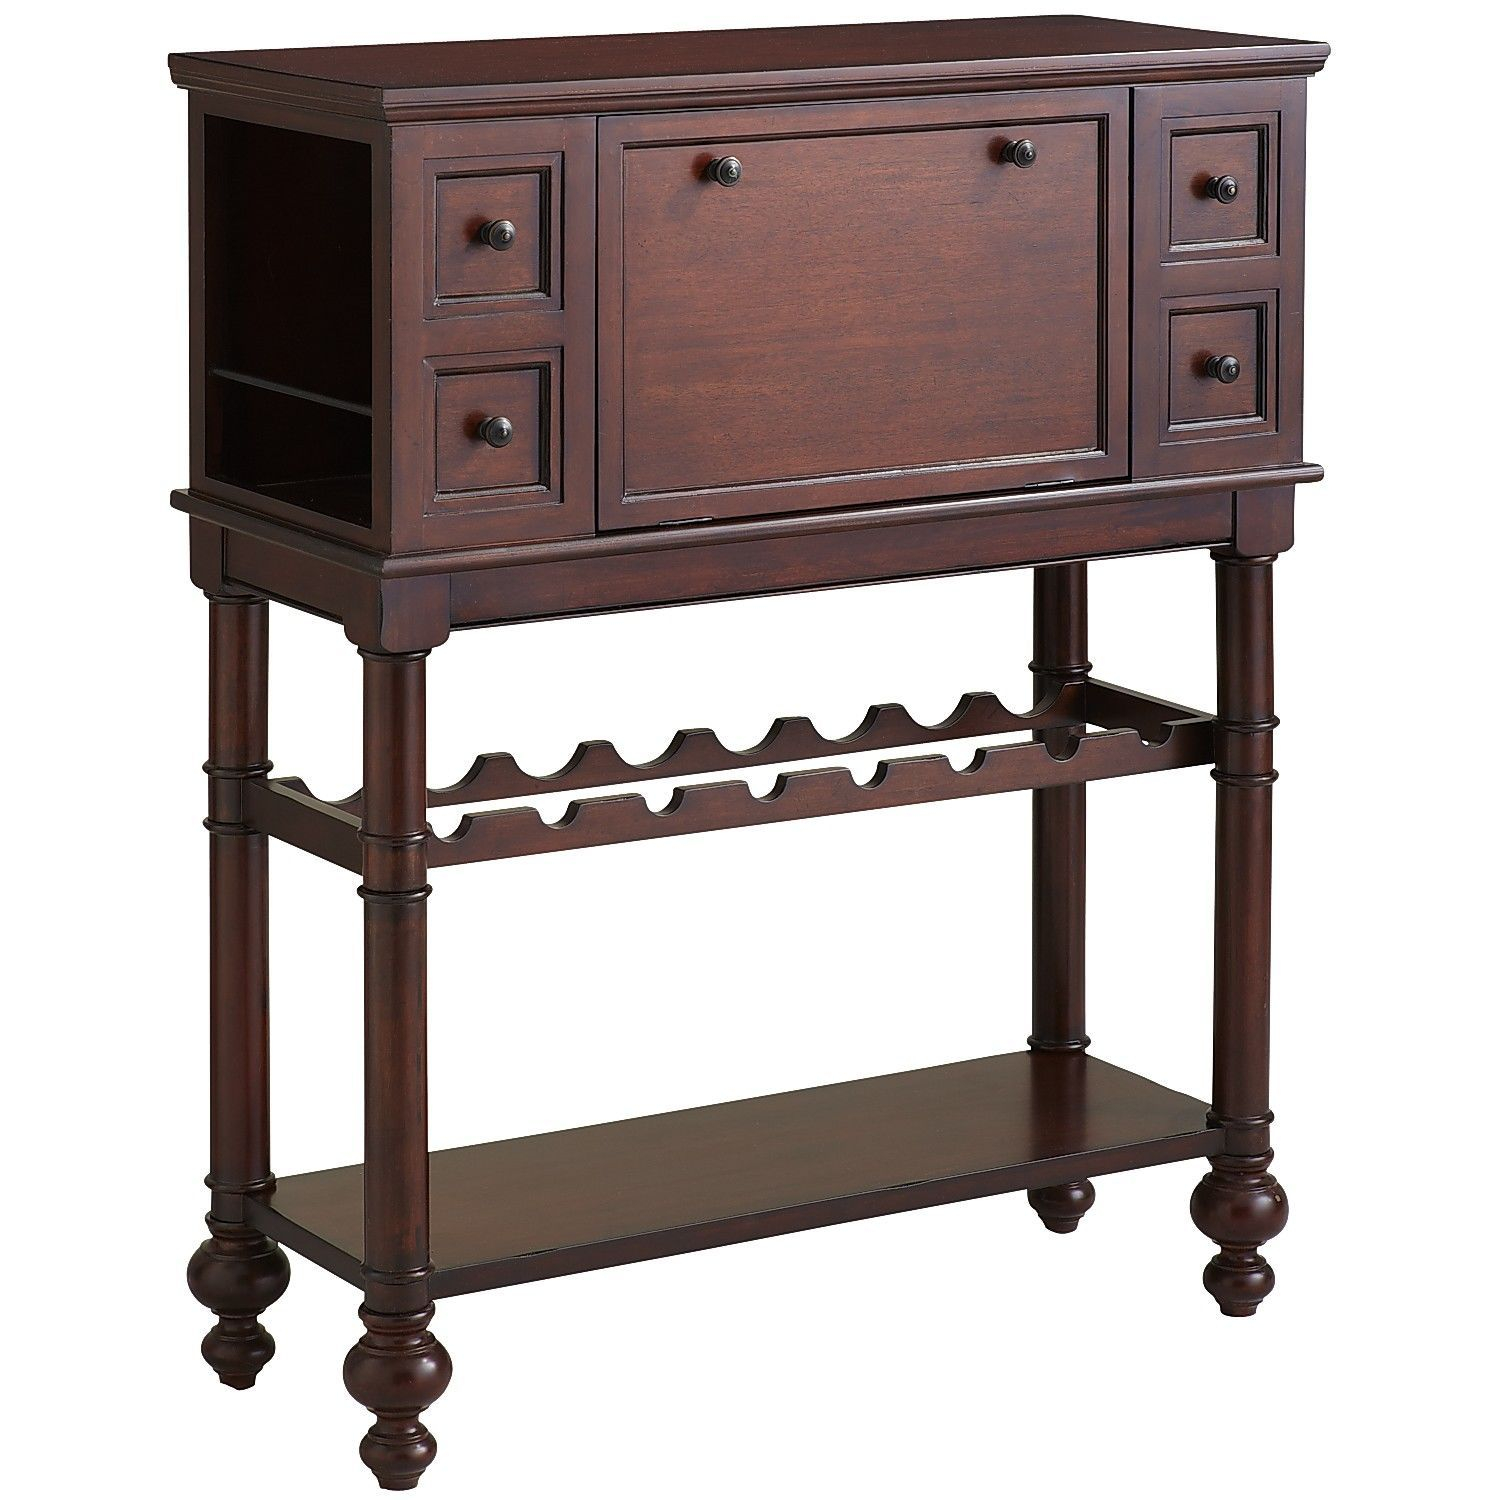 Grant Bar Cabinet Pier 1 Imports British Colonial in sizing 1500 X 1500